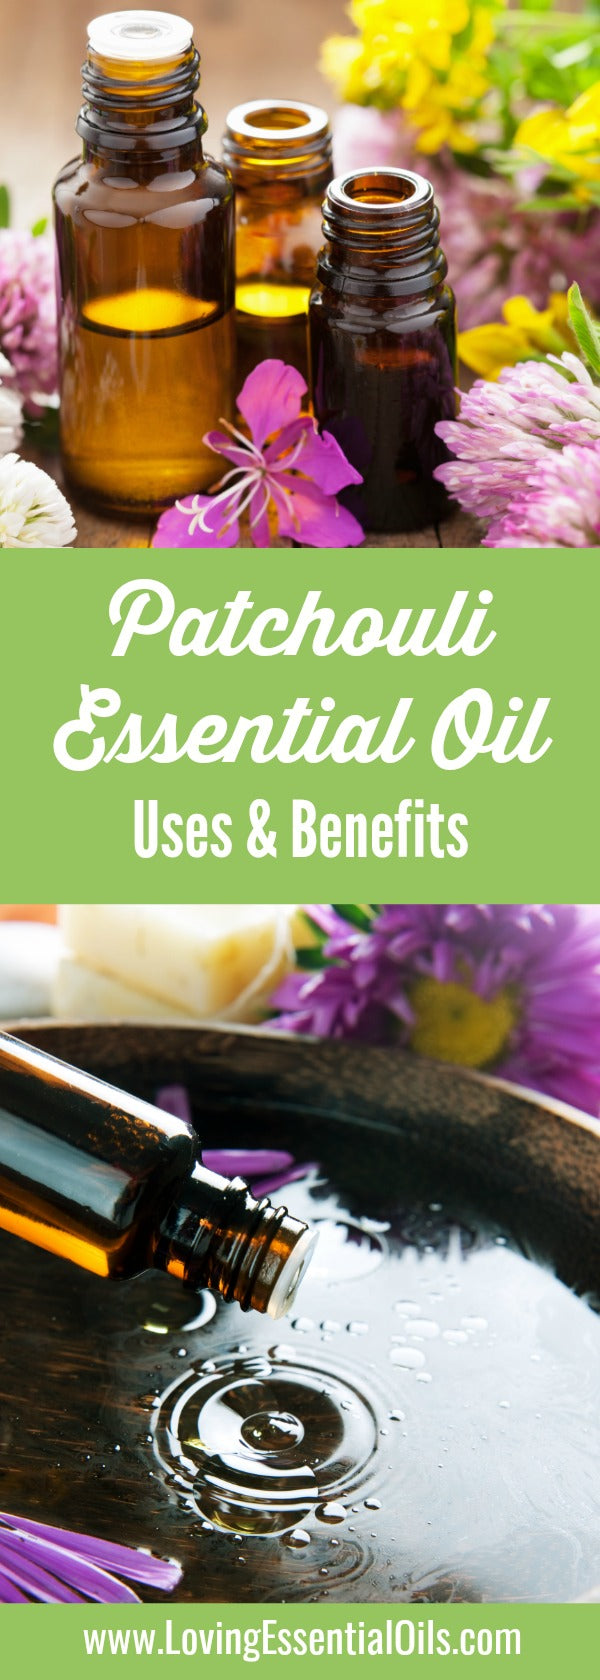 Best Patchouli Oil Uses & Benefits by Loving Essential Oils